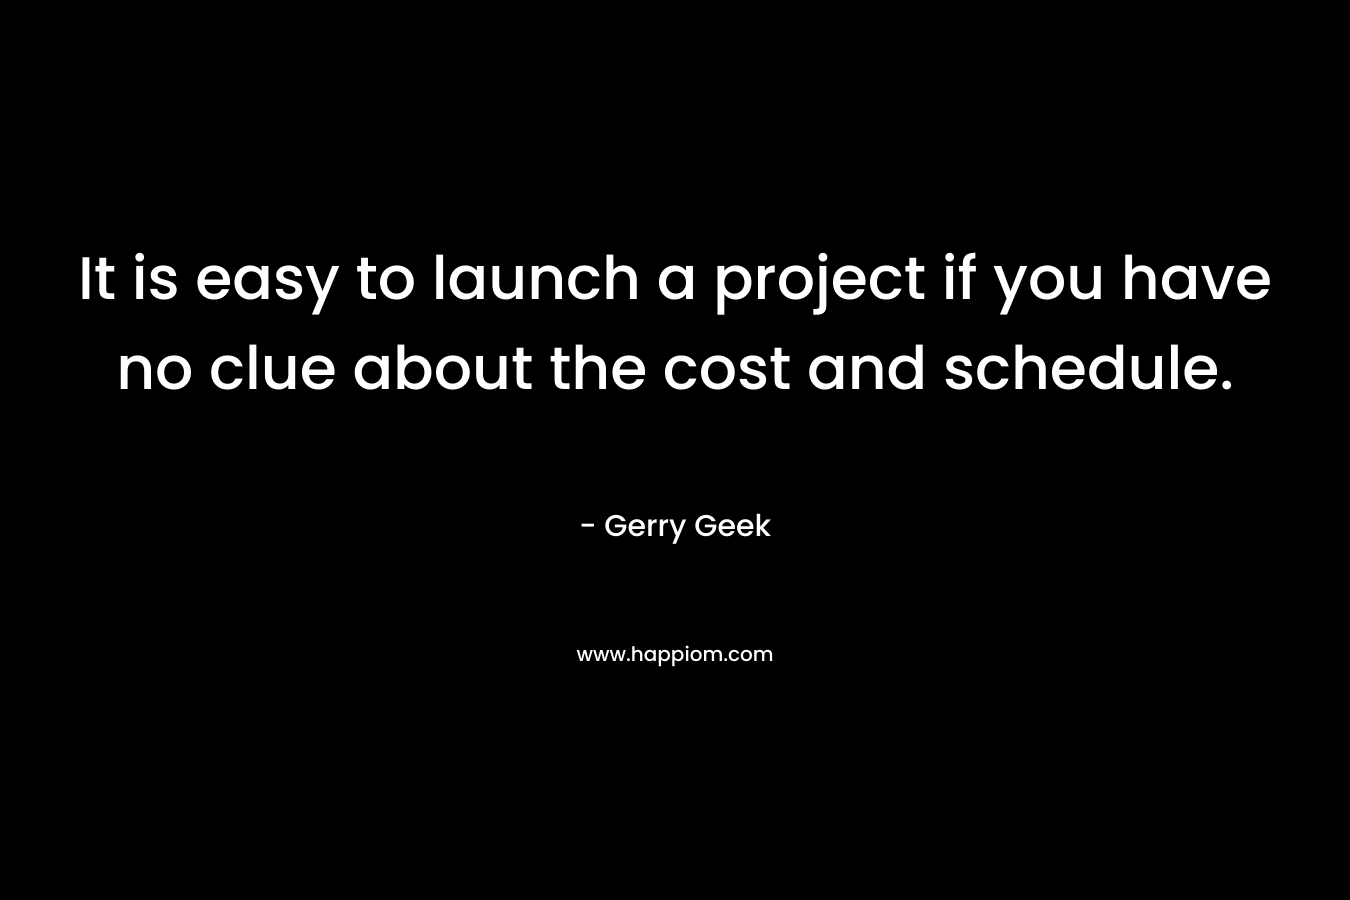 It is easy to launch a project if you have no clue about the cost and schedule. – Gerry Geek